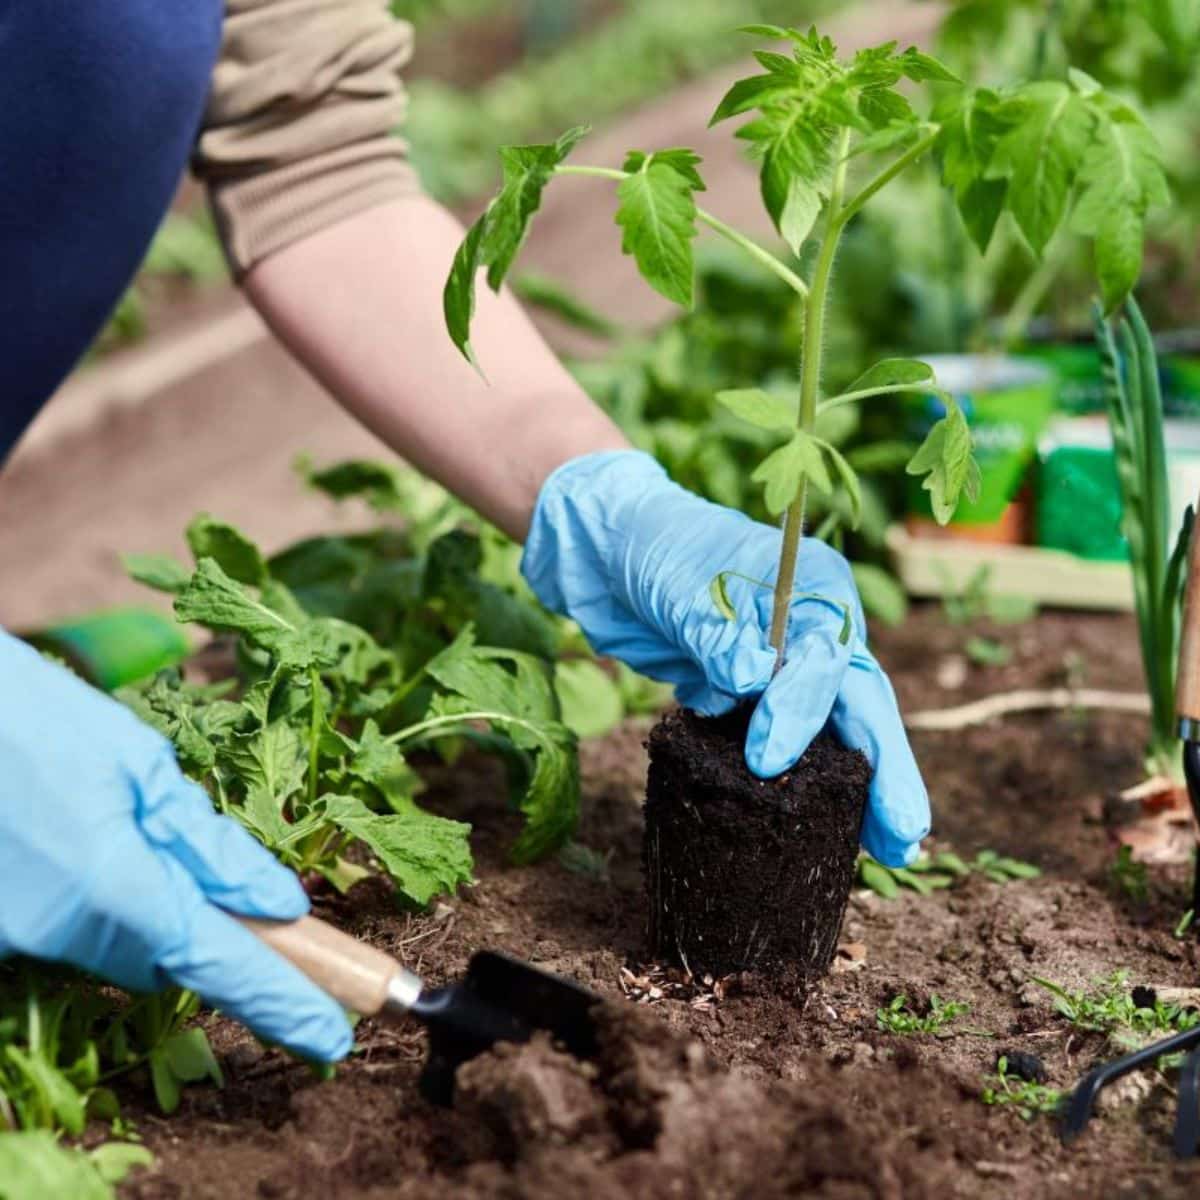 A gardener is planting a tomato seedling.